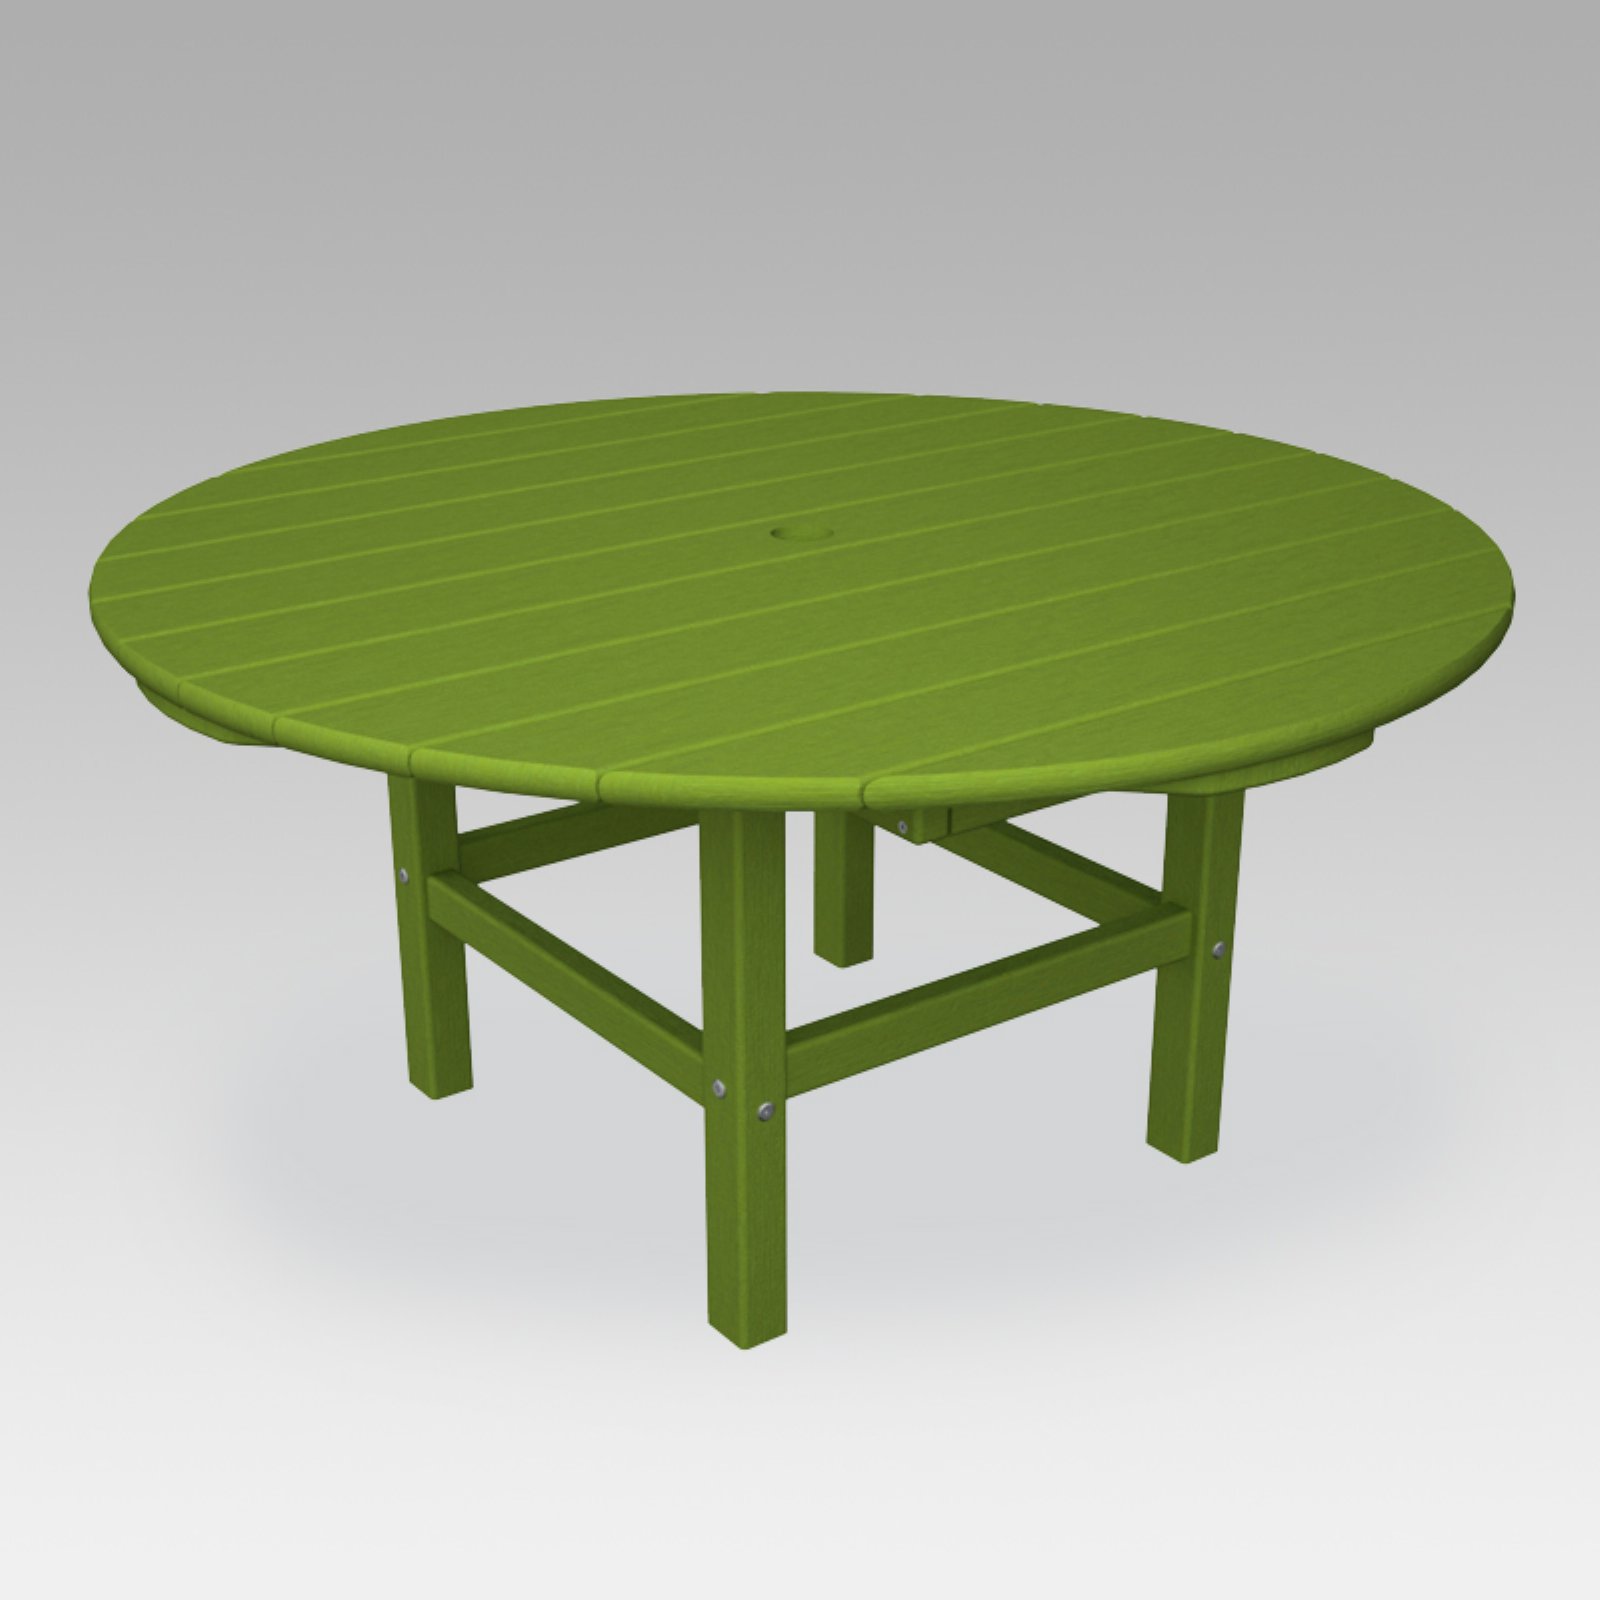 POLYWOOD® Classic Recycled Plastic Conversation Table - 38 in. Vibrant Colors - image 2 of 2